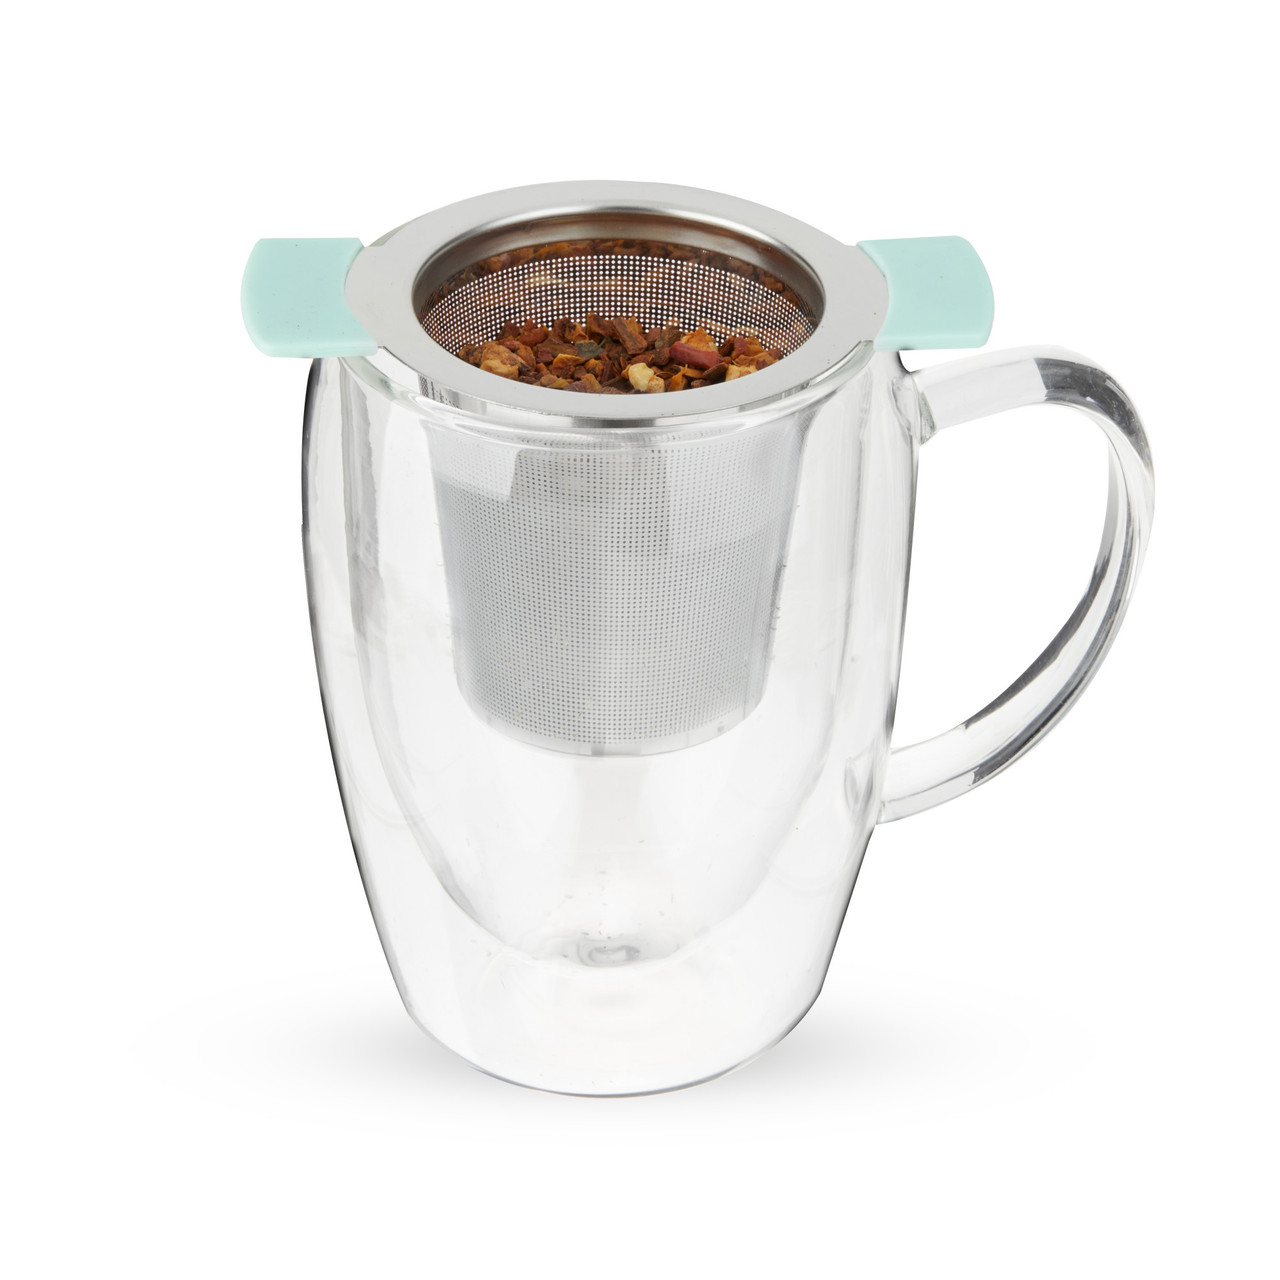 Erin Turquoise Universal Tea Infuser in Turquoise by Pinky U